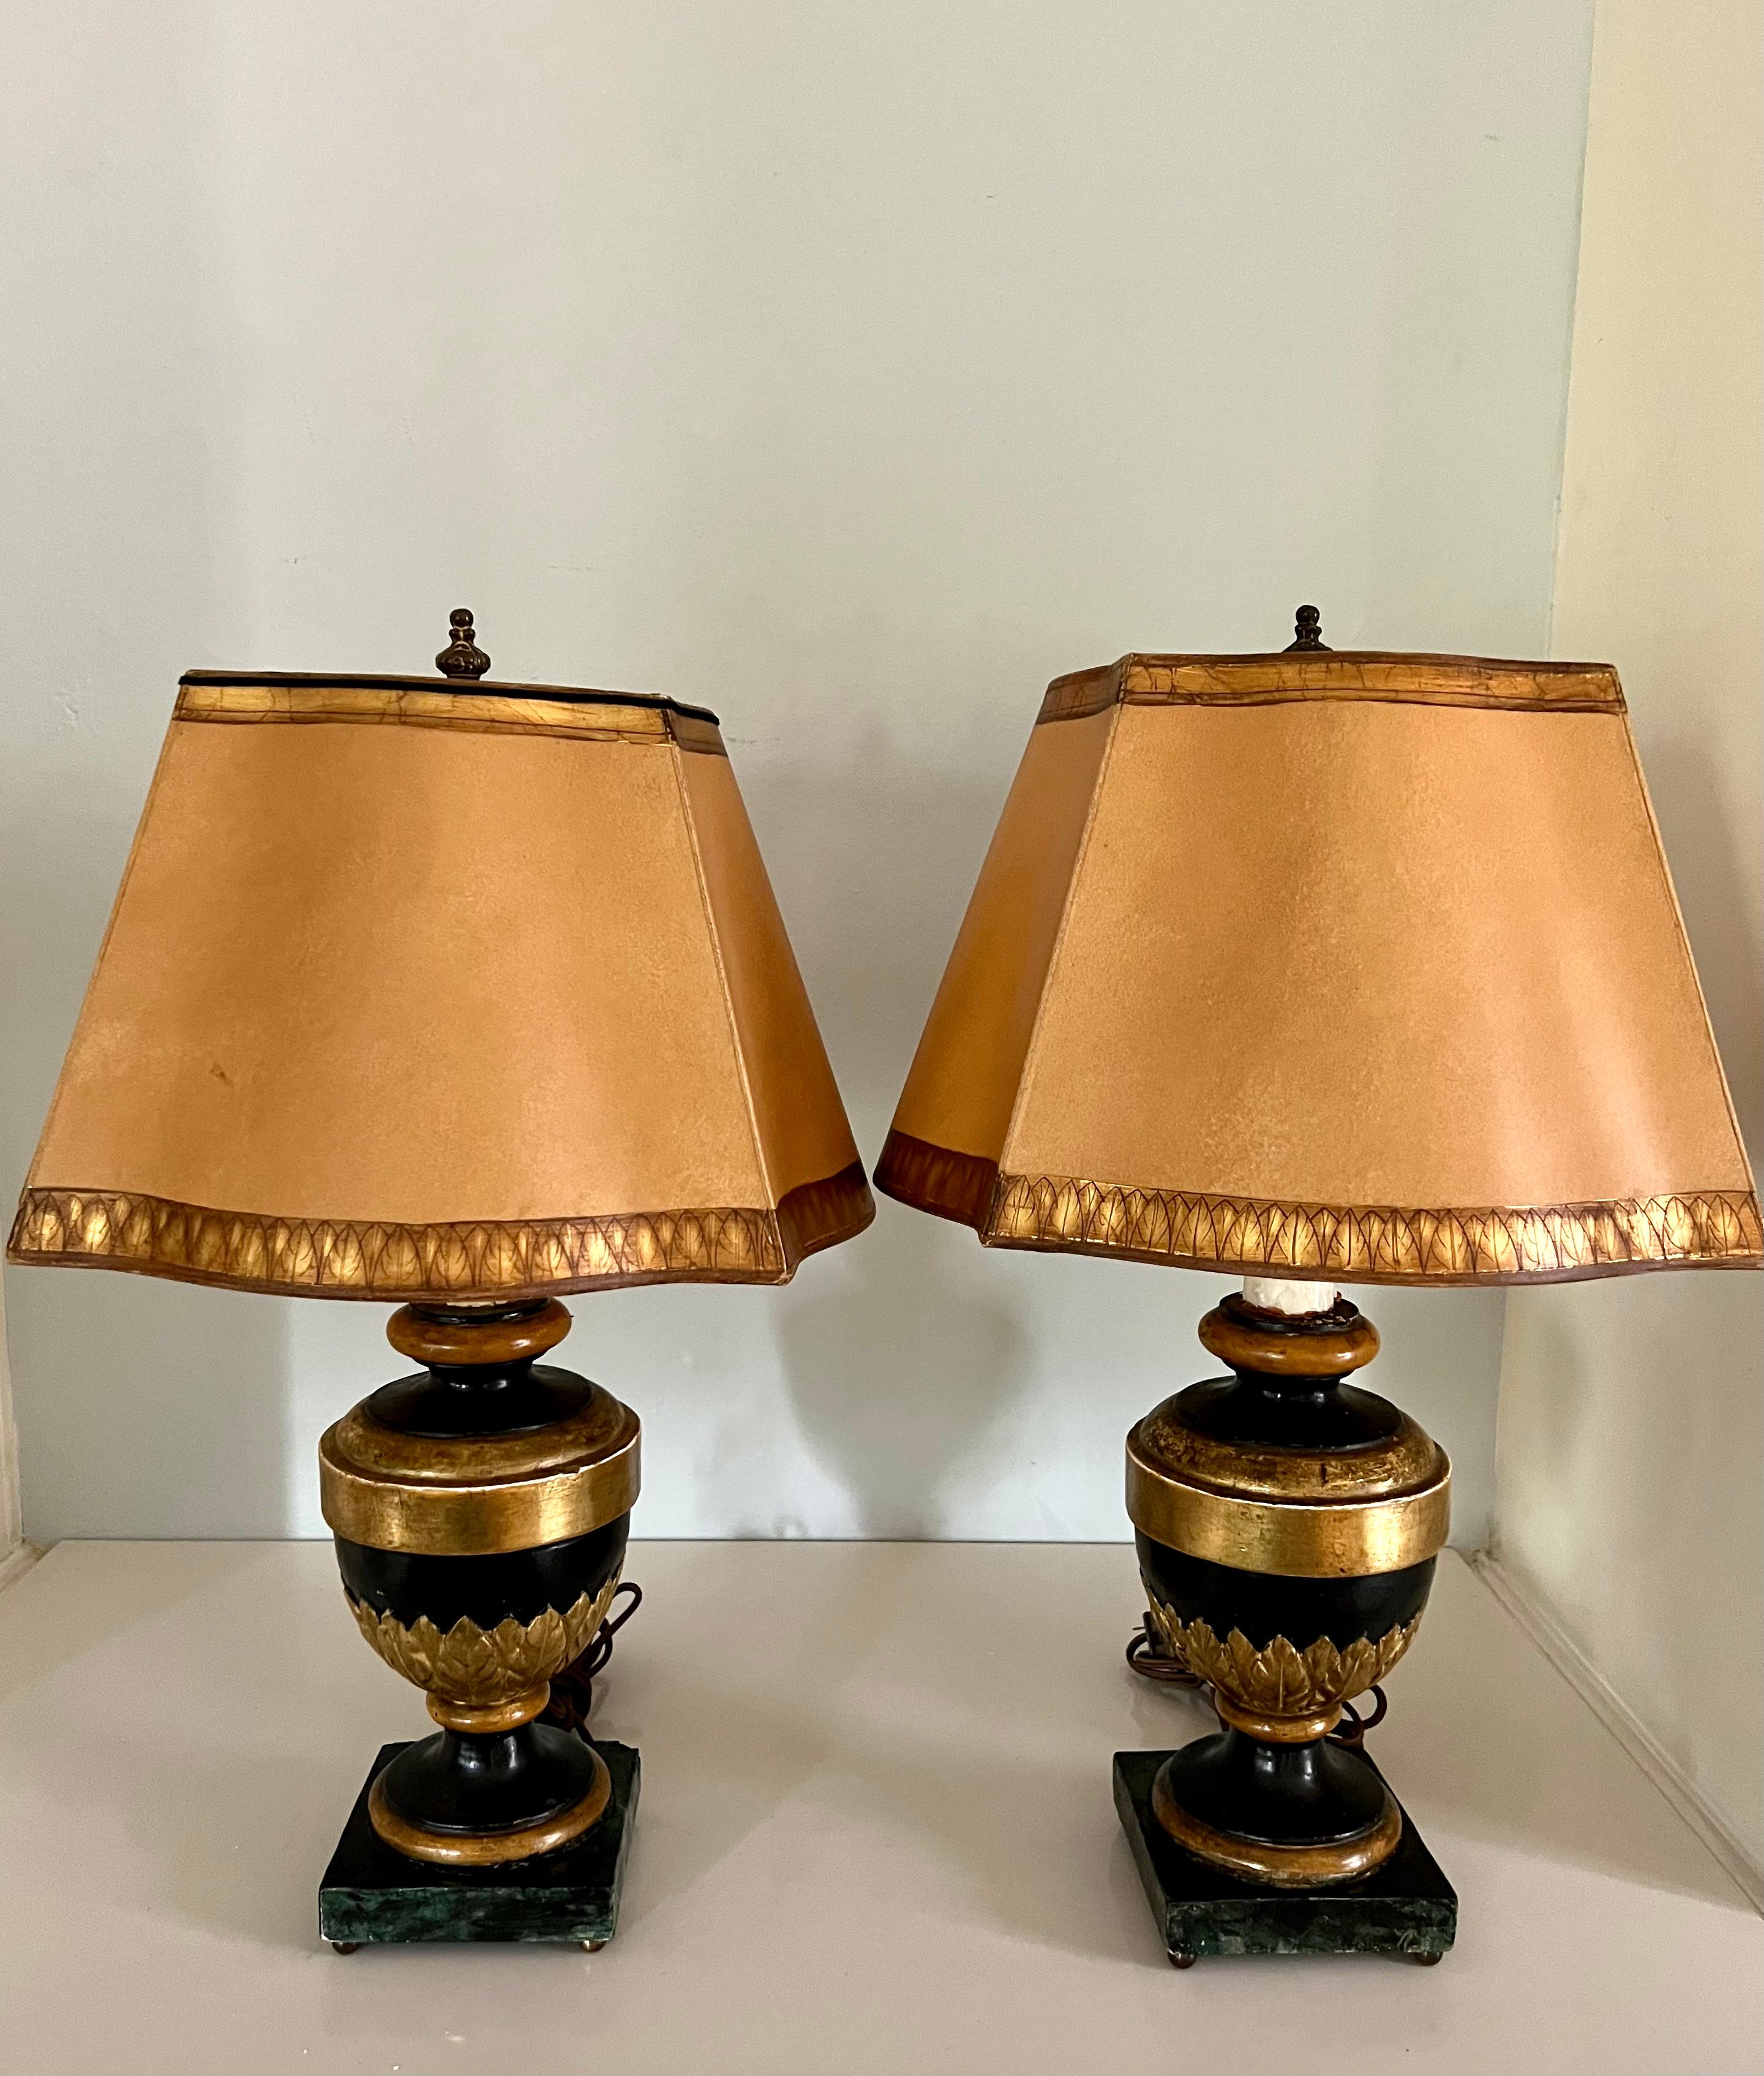 20th Century Pair of Carved Wood Gilt and Faux Marble Base Lamps with Matching Gilt Shades For Sale